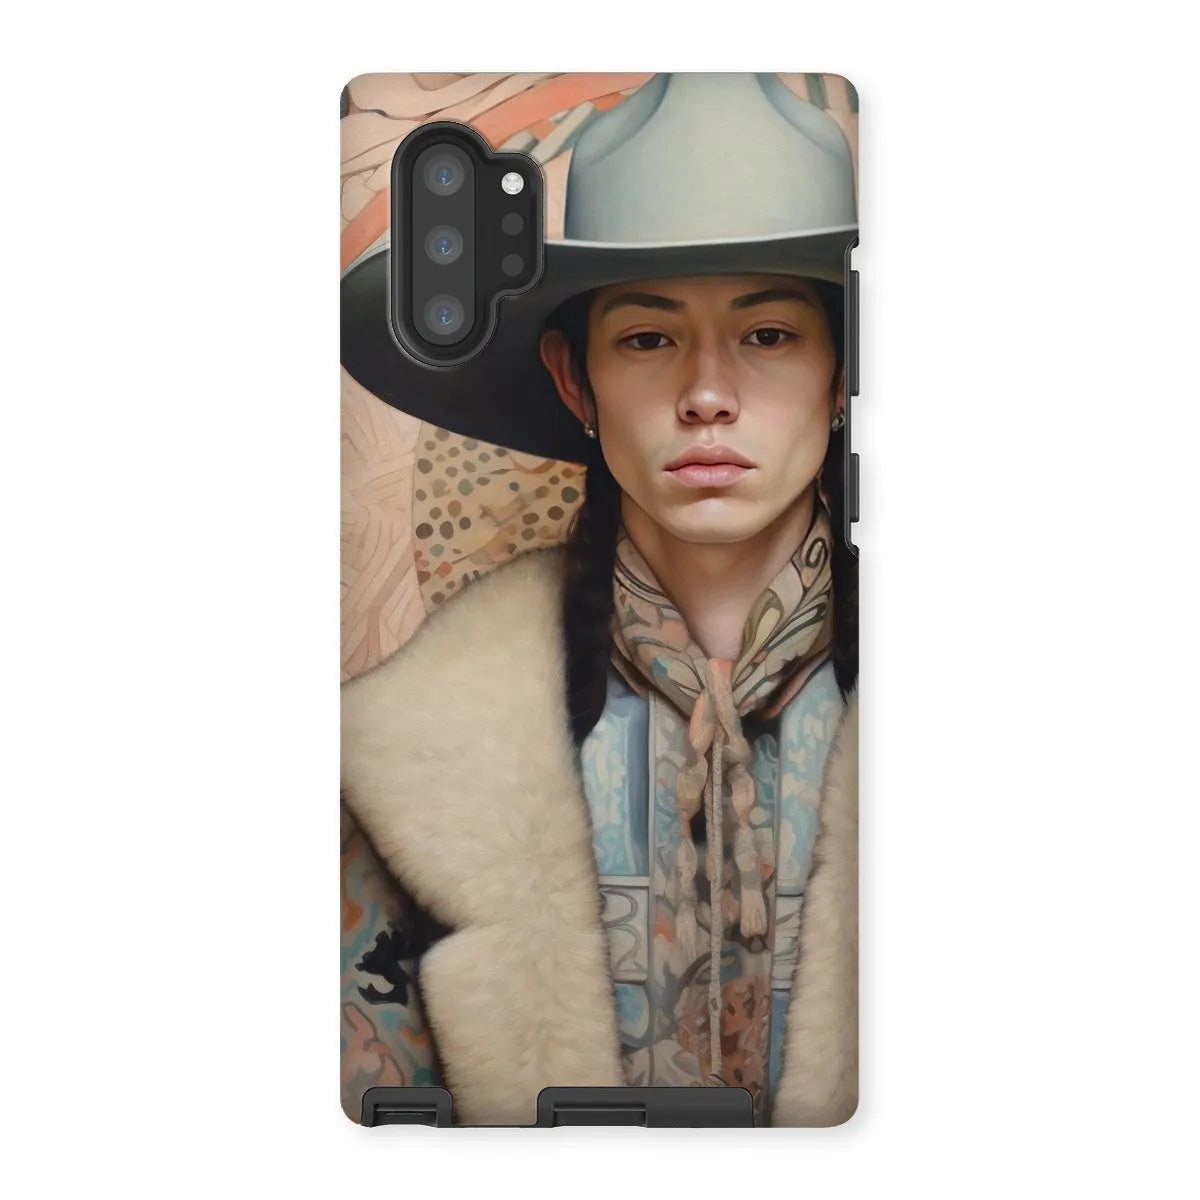 Jacy The Gay Cowboy - Dandy Gay Aesthetic Art Phone Case - Samsung Galaxy Note 10p / Matte - Mobile Phone Cases